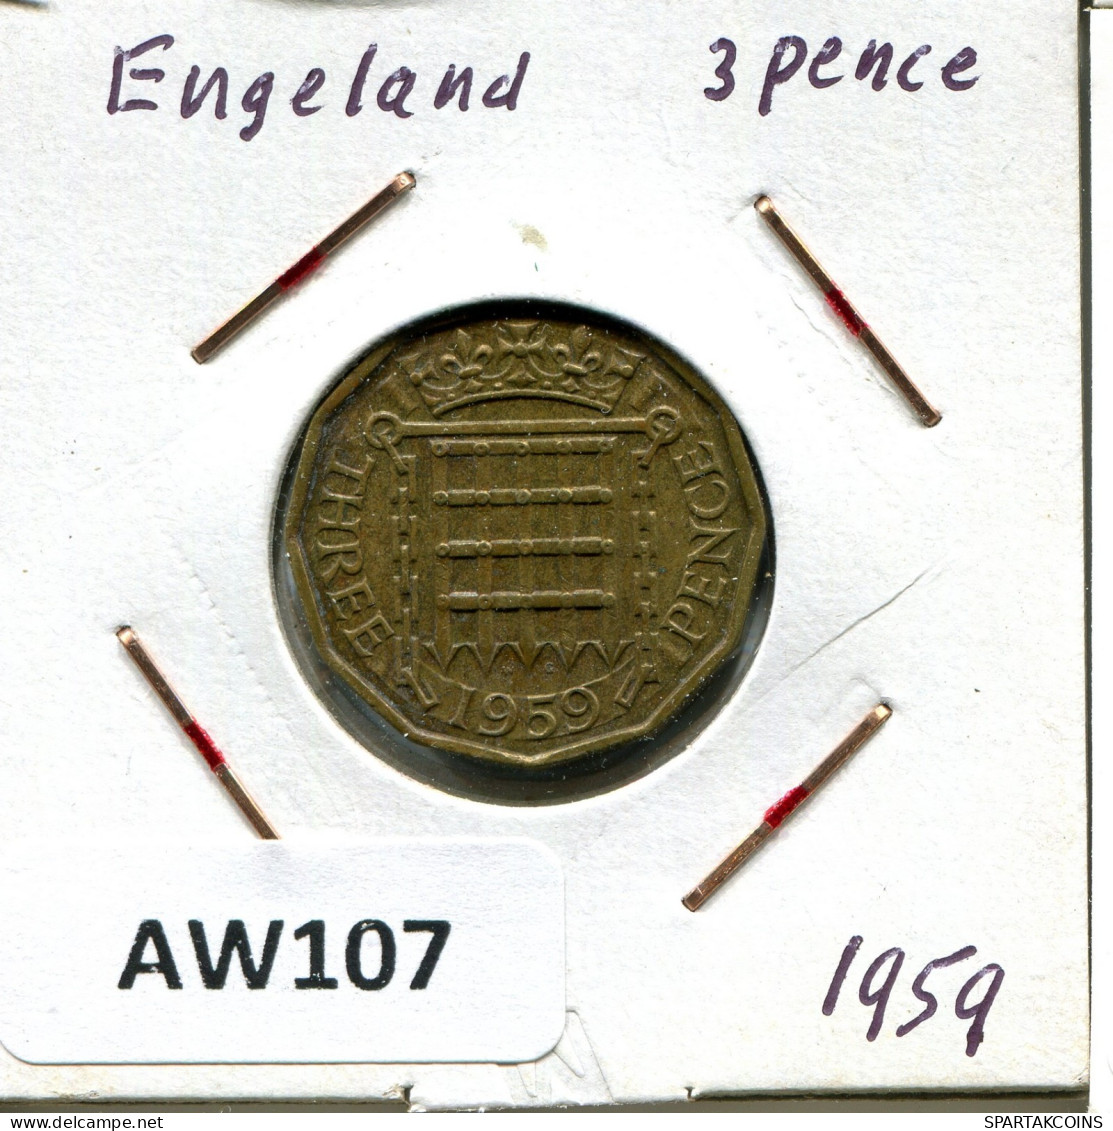 THREEPENCE 1959 UK GREAT BRITAIN Coin #AW107.U.A - F. 3 Pence